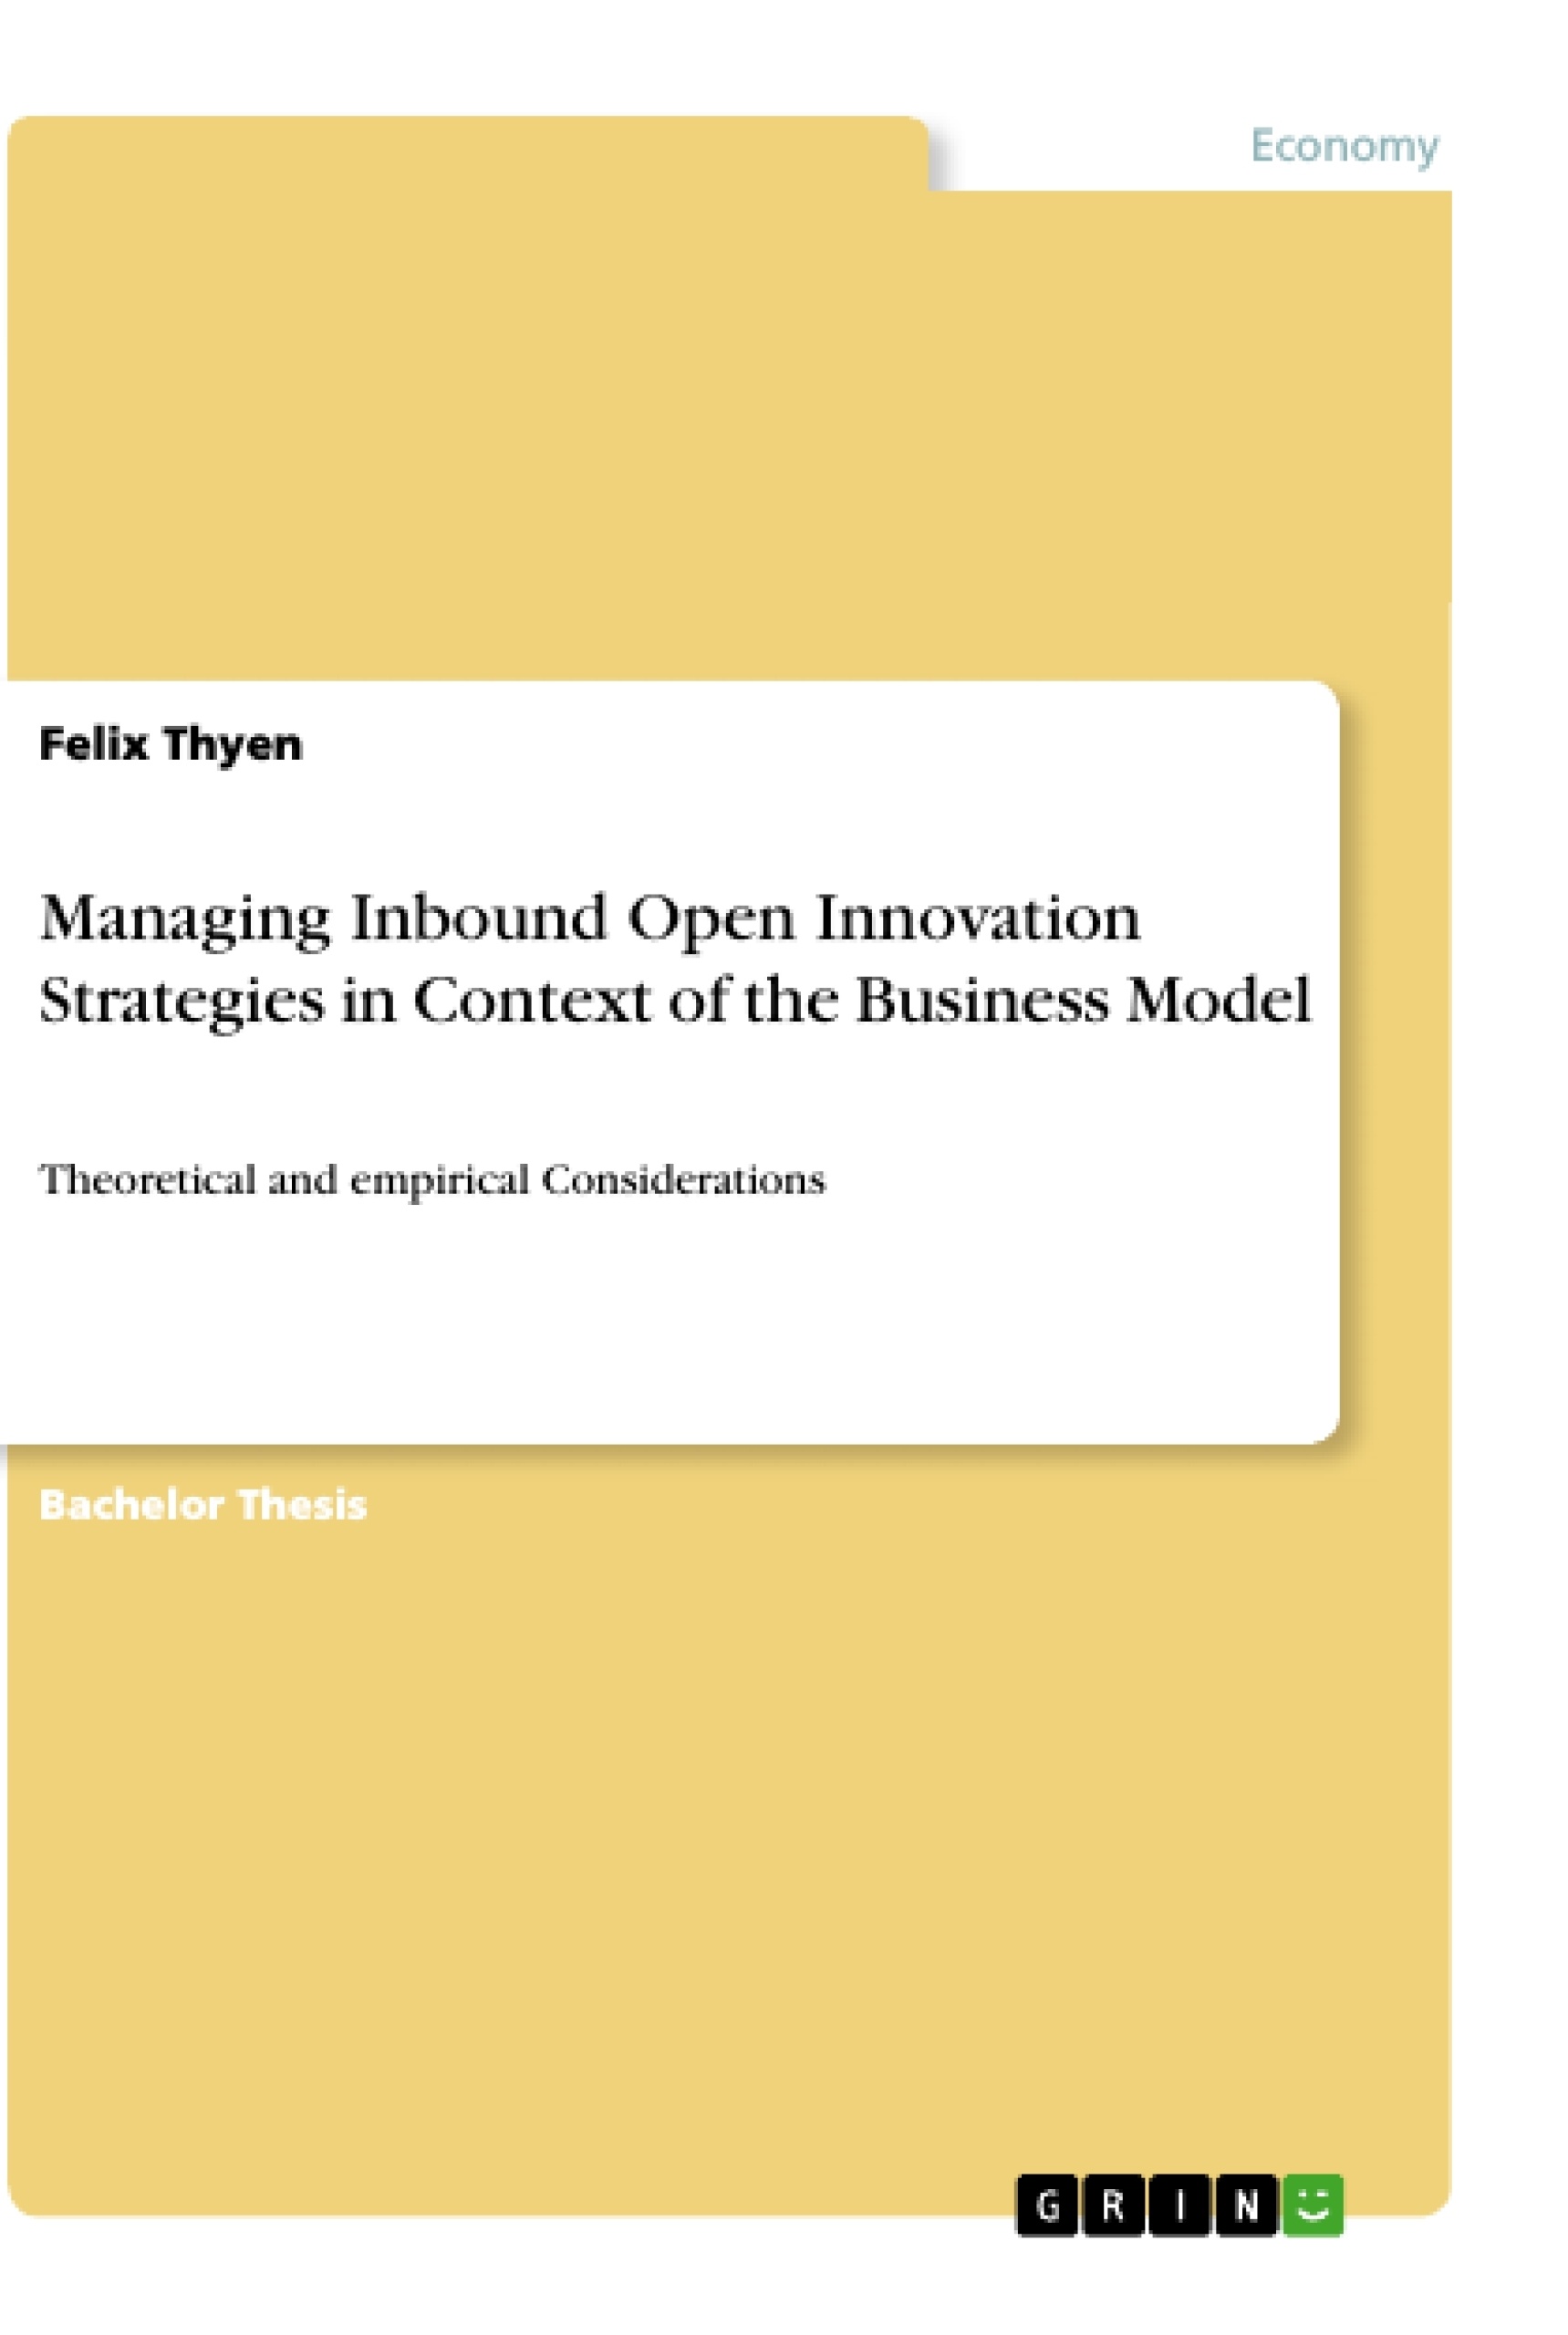 Title: Managing Inbound Open Innovation Strategies in Context of the Business Model